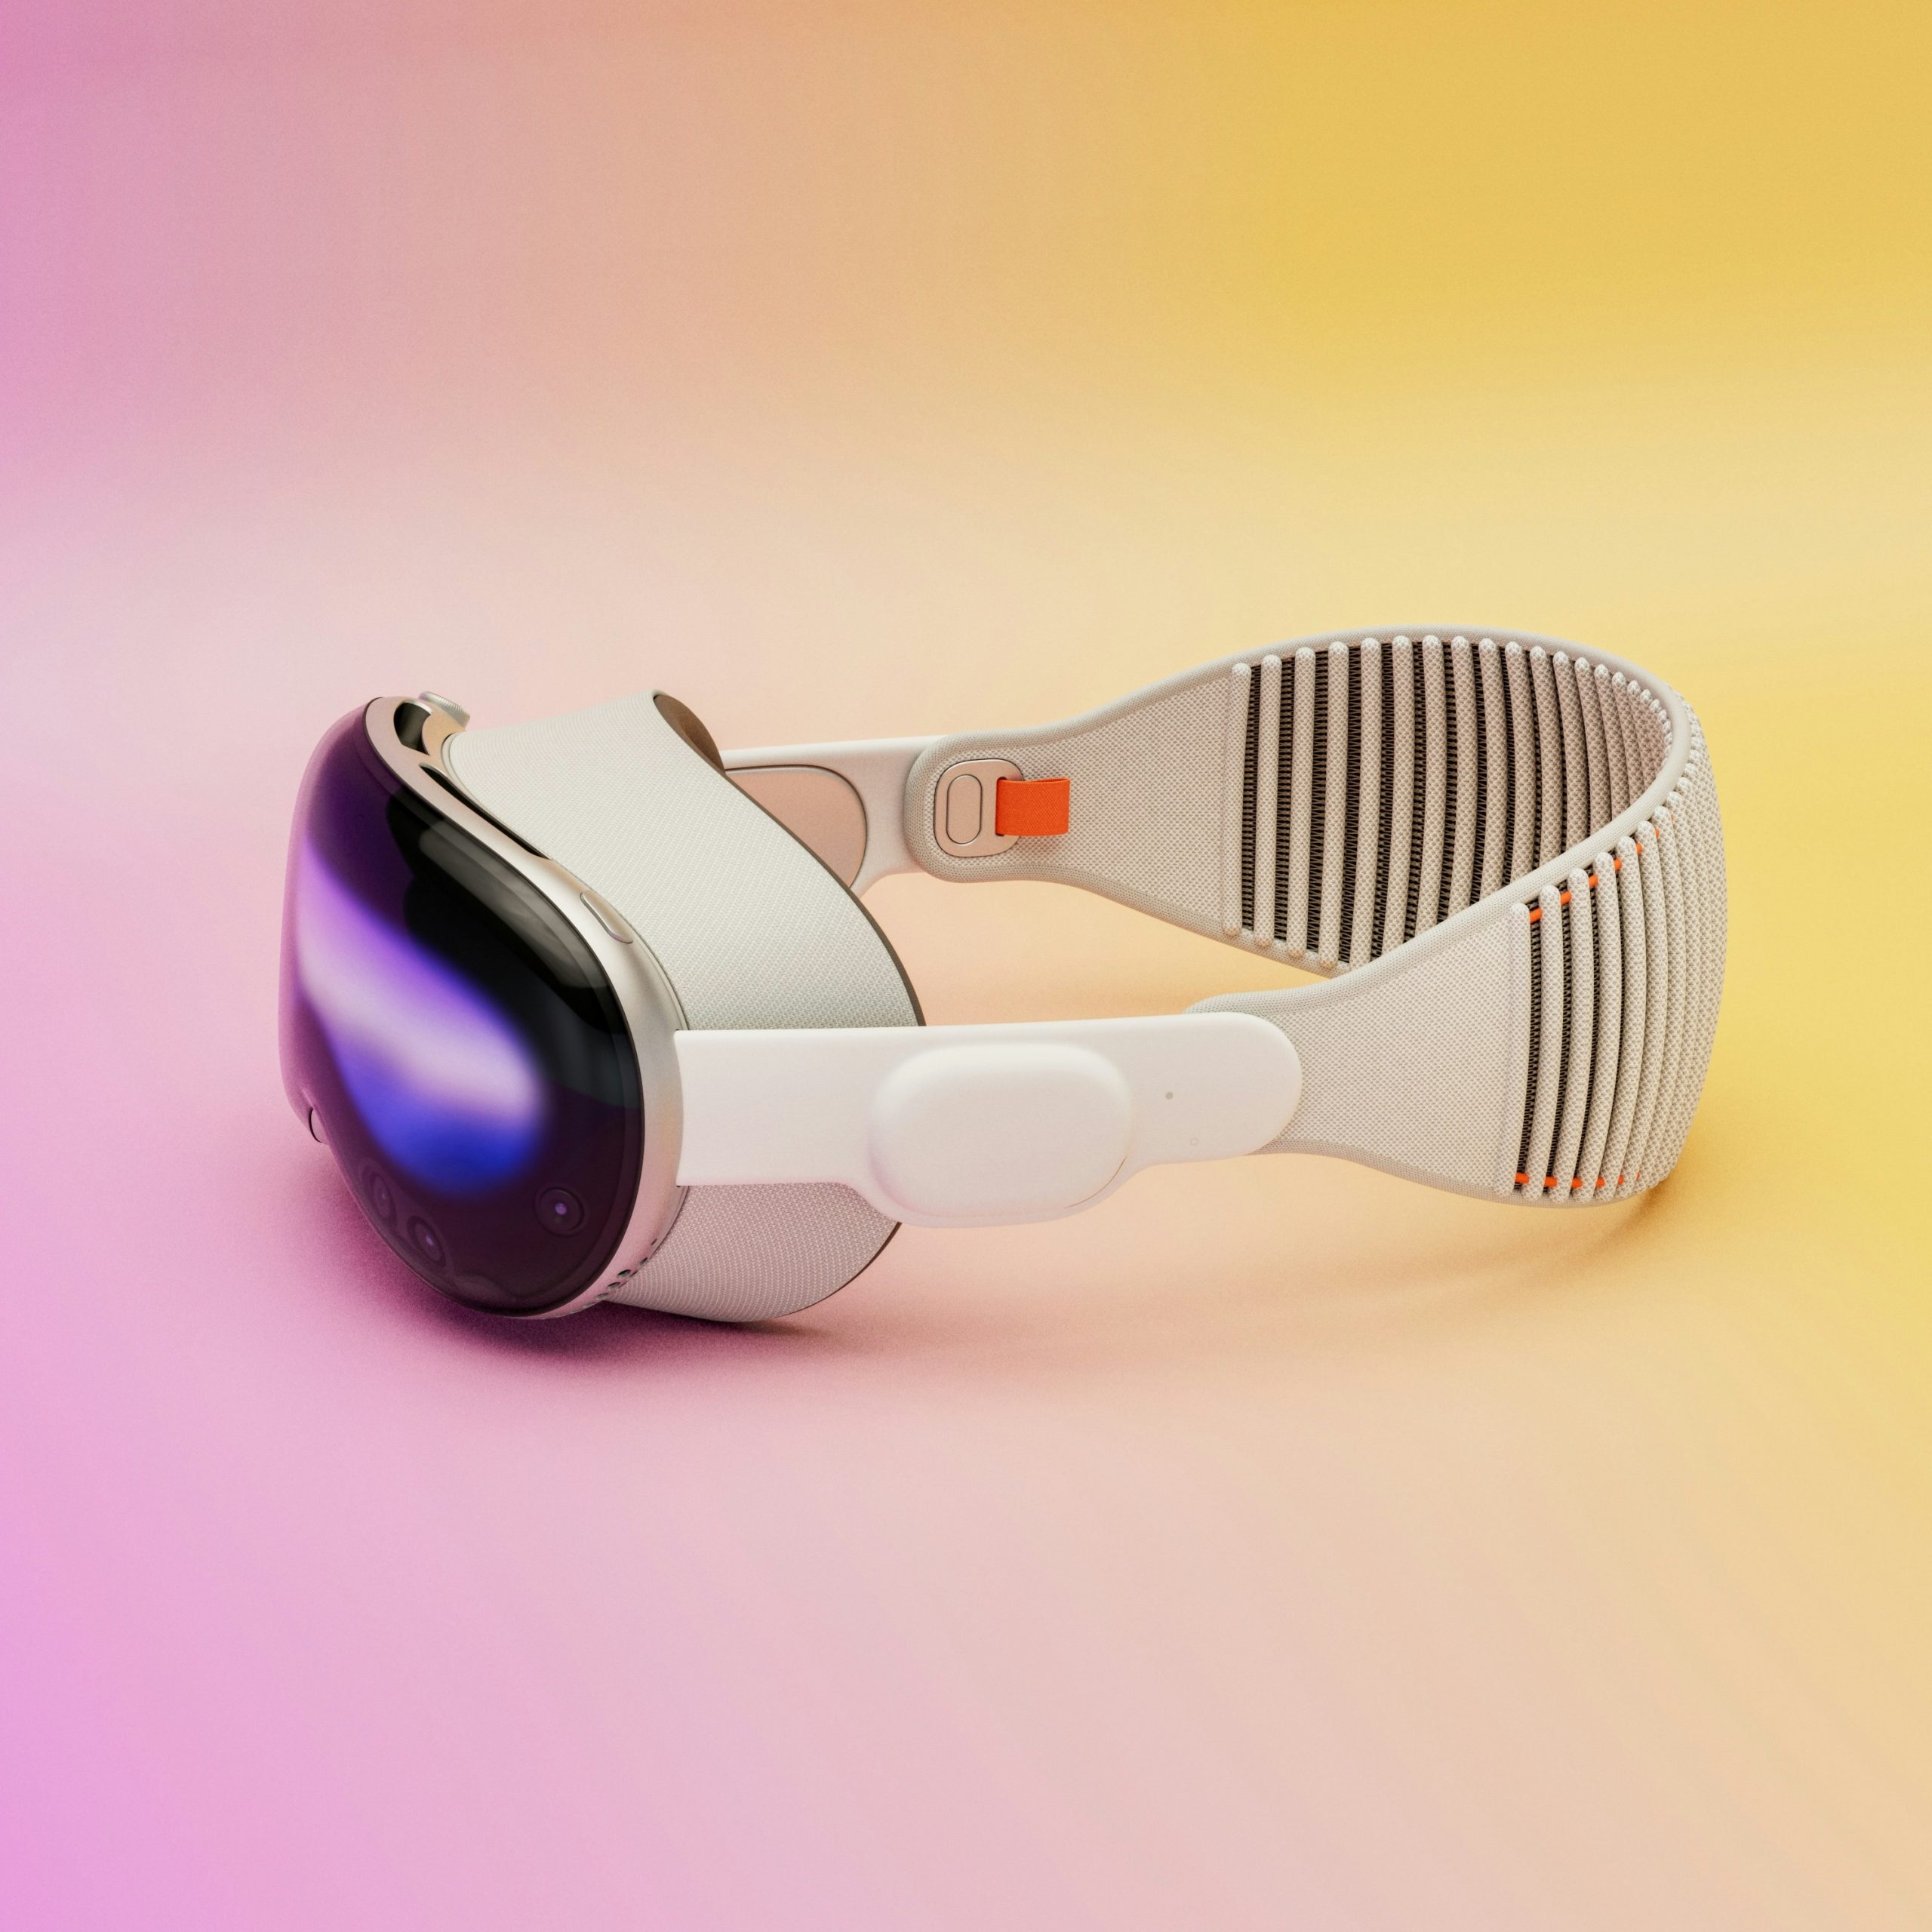 A picture of Apple's Vision Pro headset